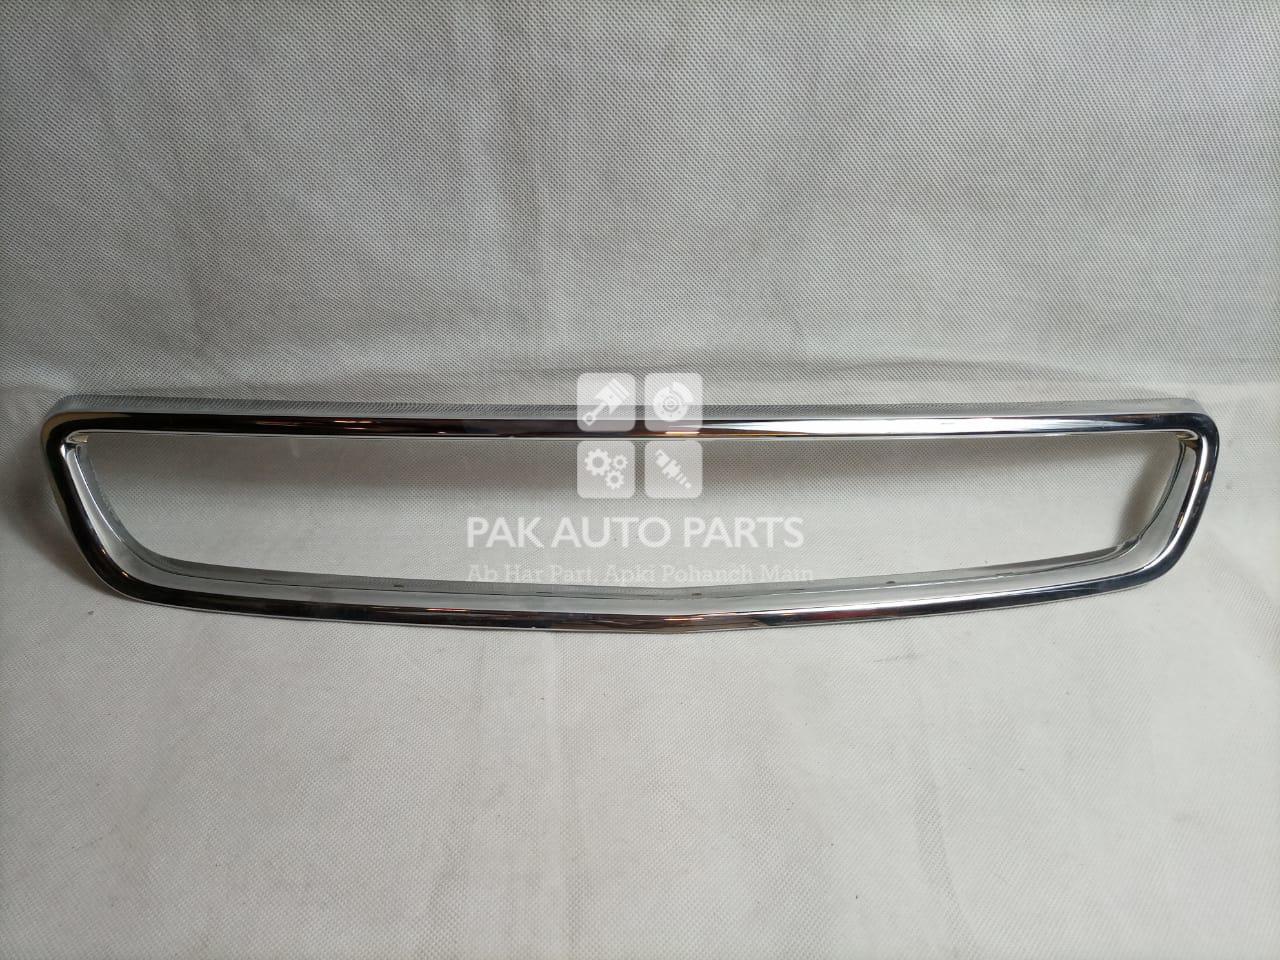 Picture of Honda Civic 1996 Show Grill Chrome